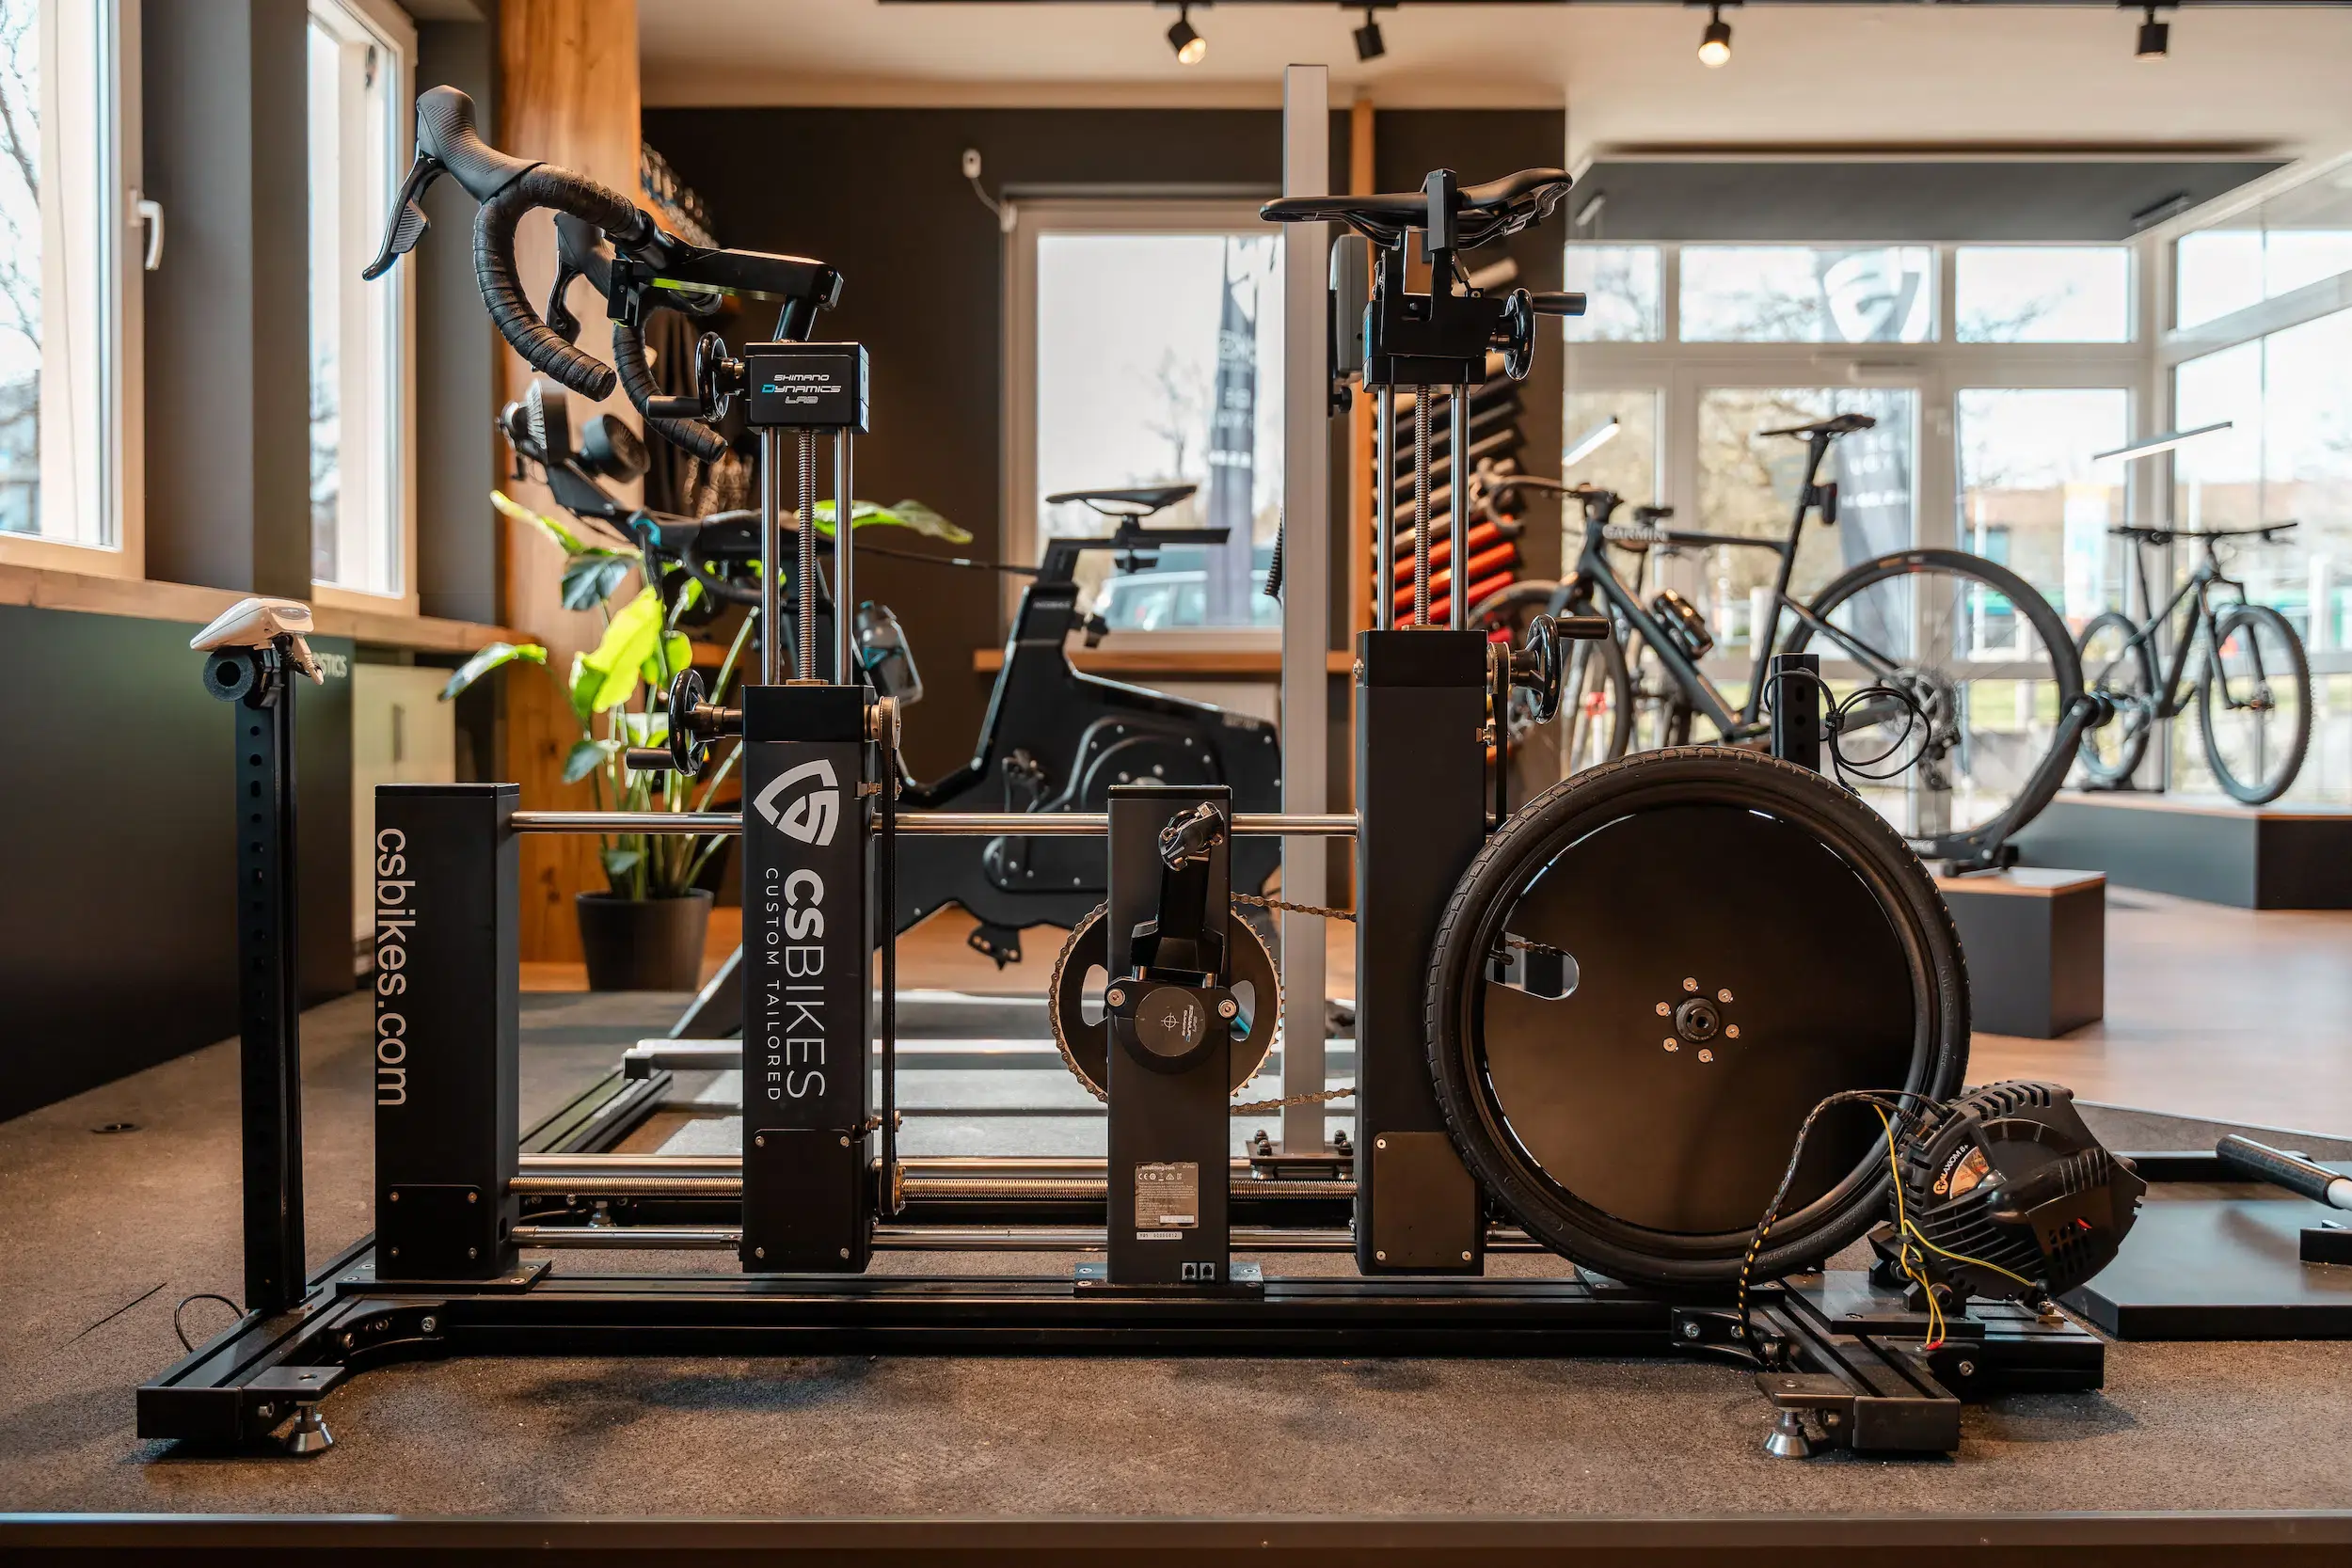 Find out more about our world-class bike fitting service, which ensures your bike is perfectly tailored to you. Our experts will be happy to explain to you how this process works and what advantages it offers. We also offer comprehensive performance diagnostics to analyze and optimize your performance.